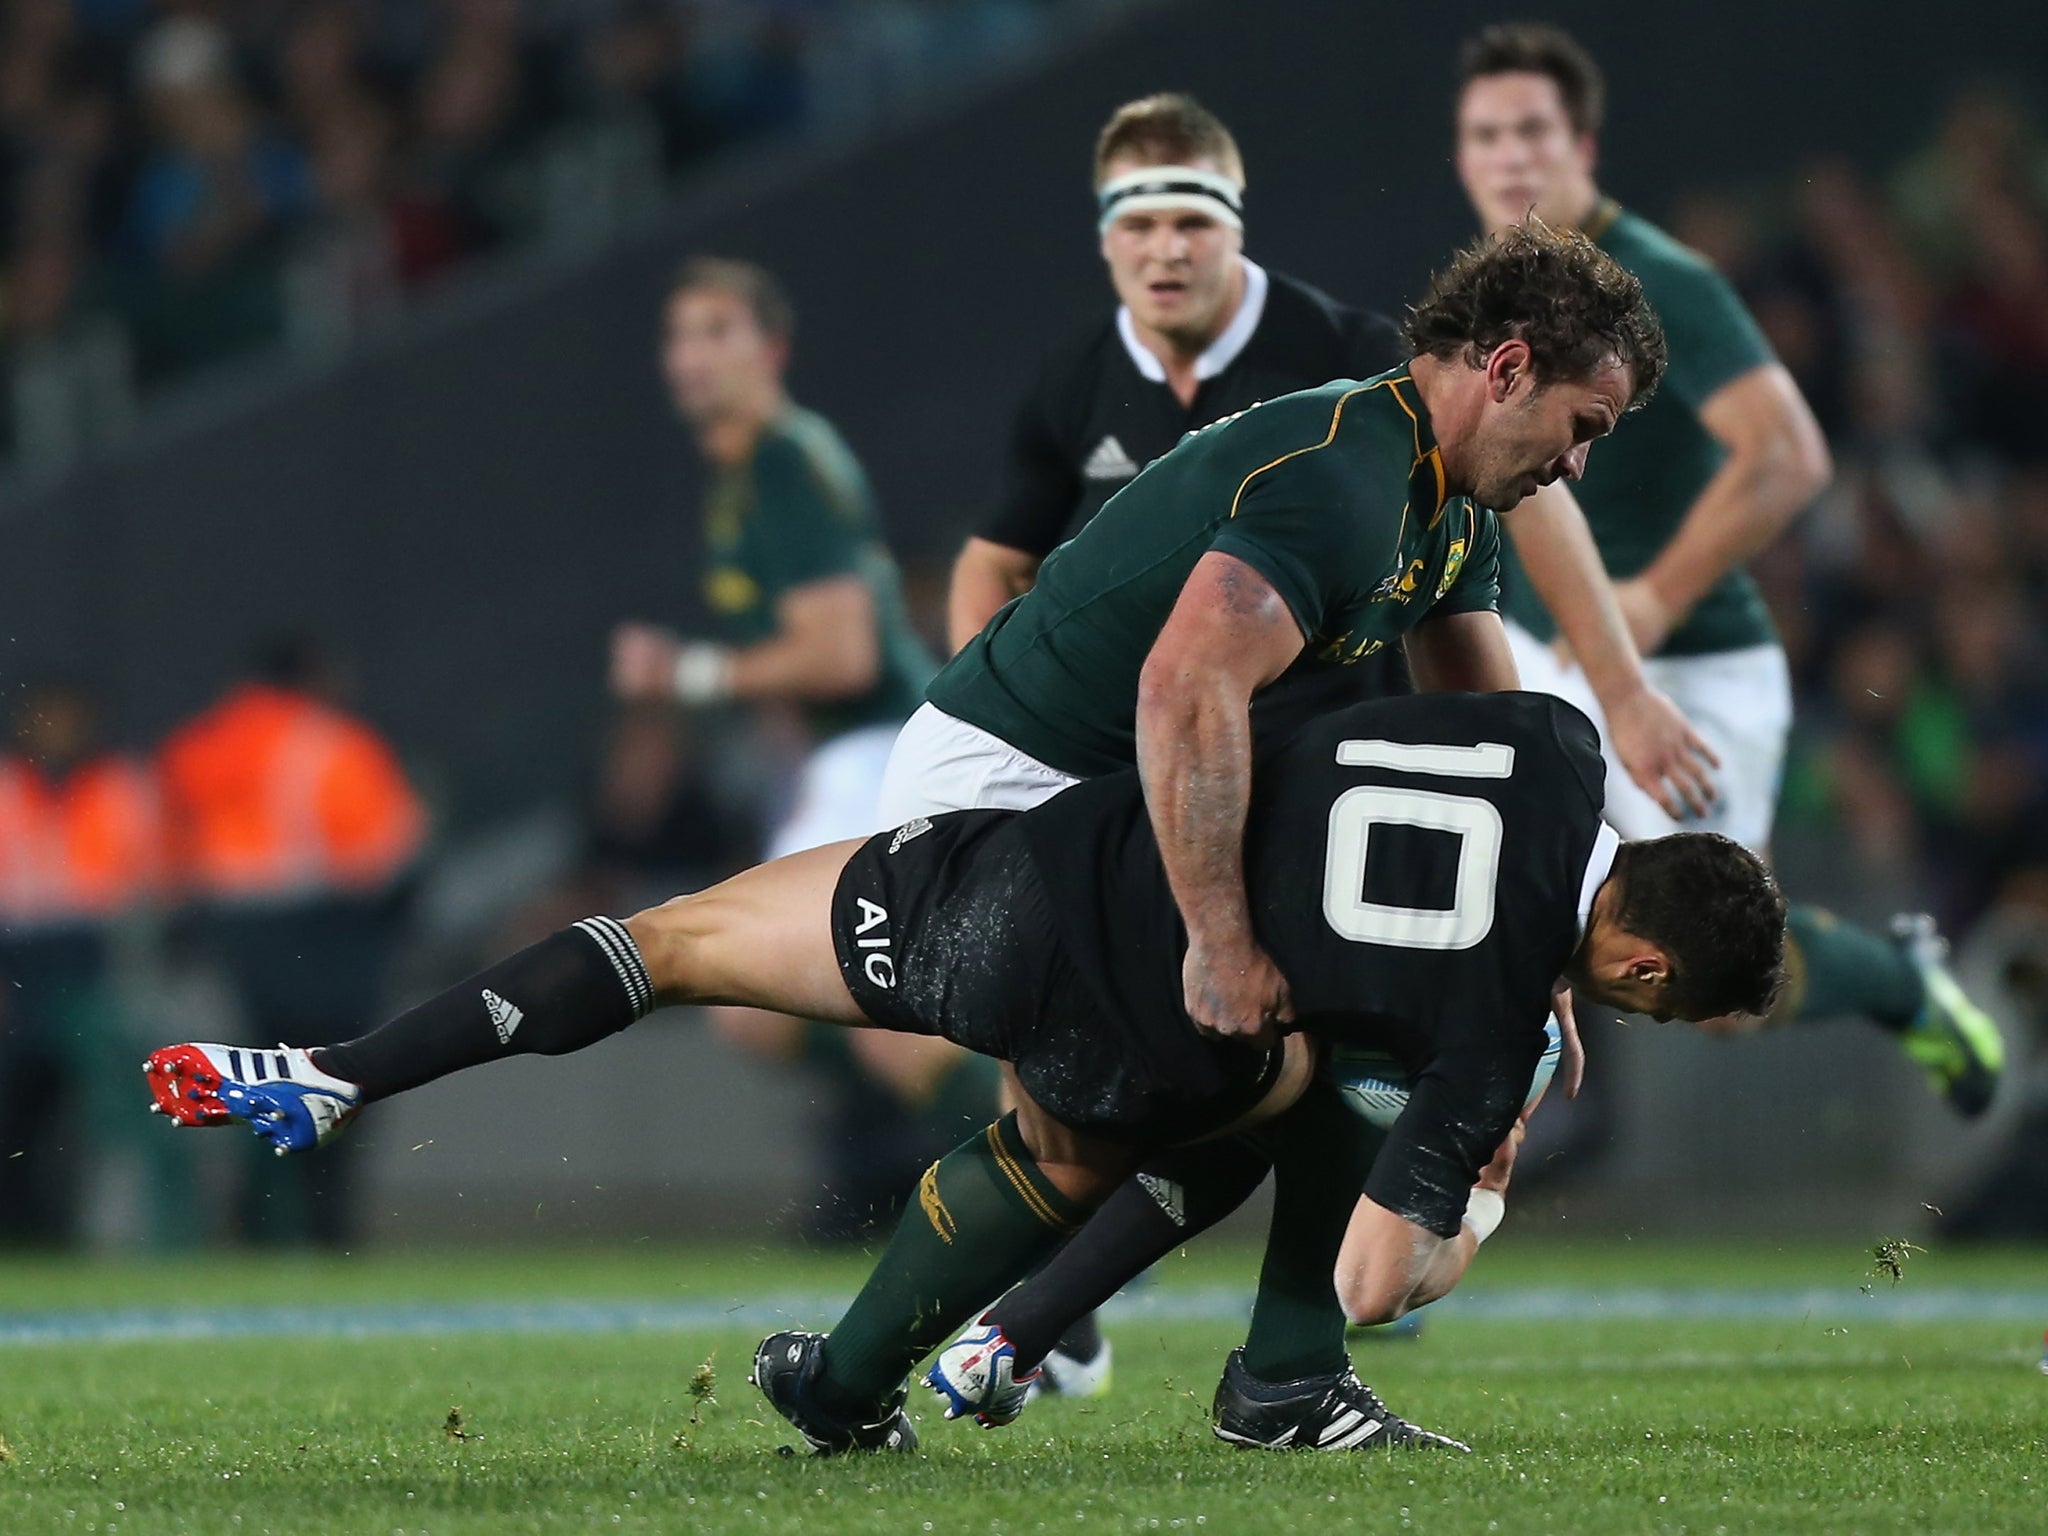 Bismarck du Plessis was given a yellow card for this high tackle on Dan Carter that left him with a dislocated shoulder